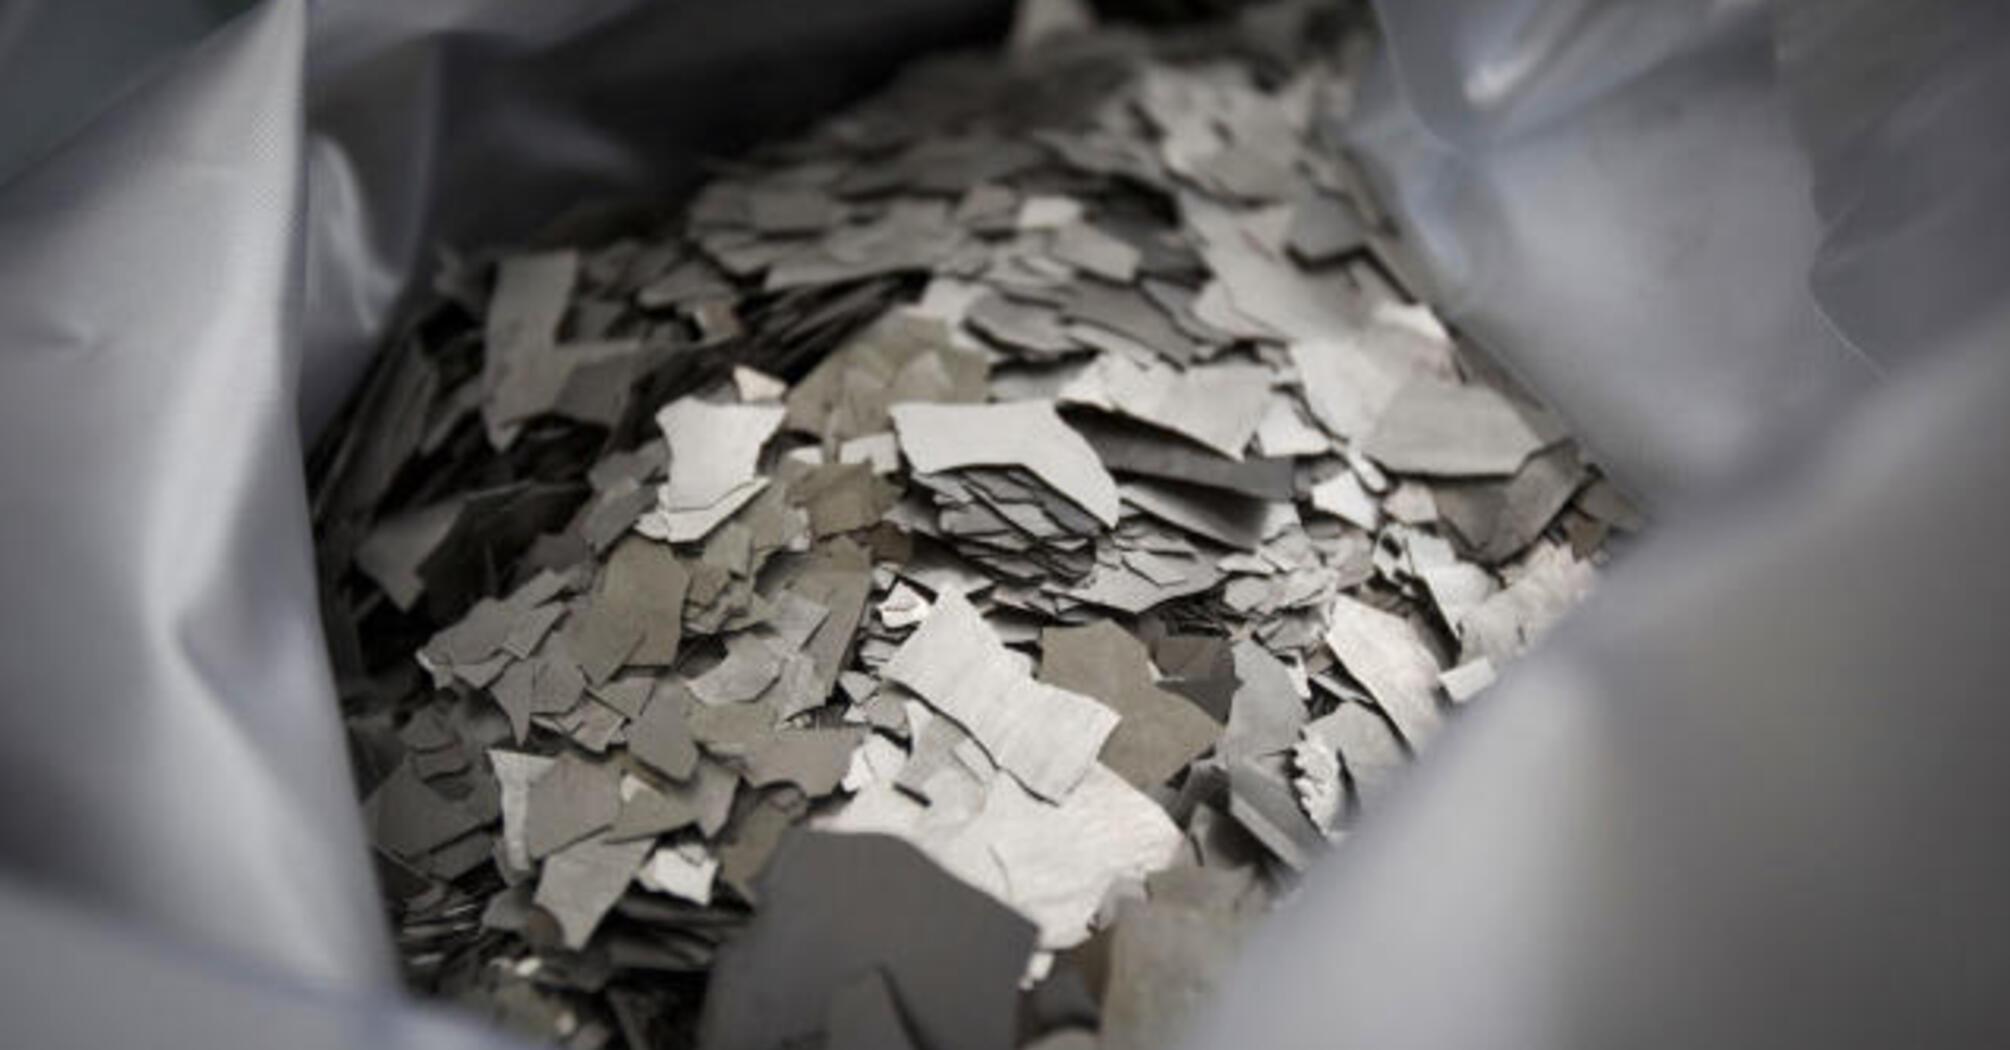 8.8 million metric tons of rare metals found in Norway